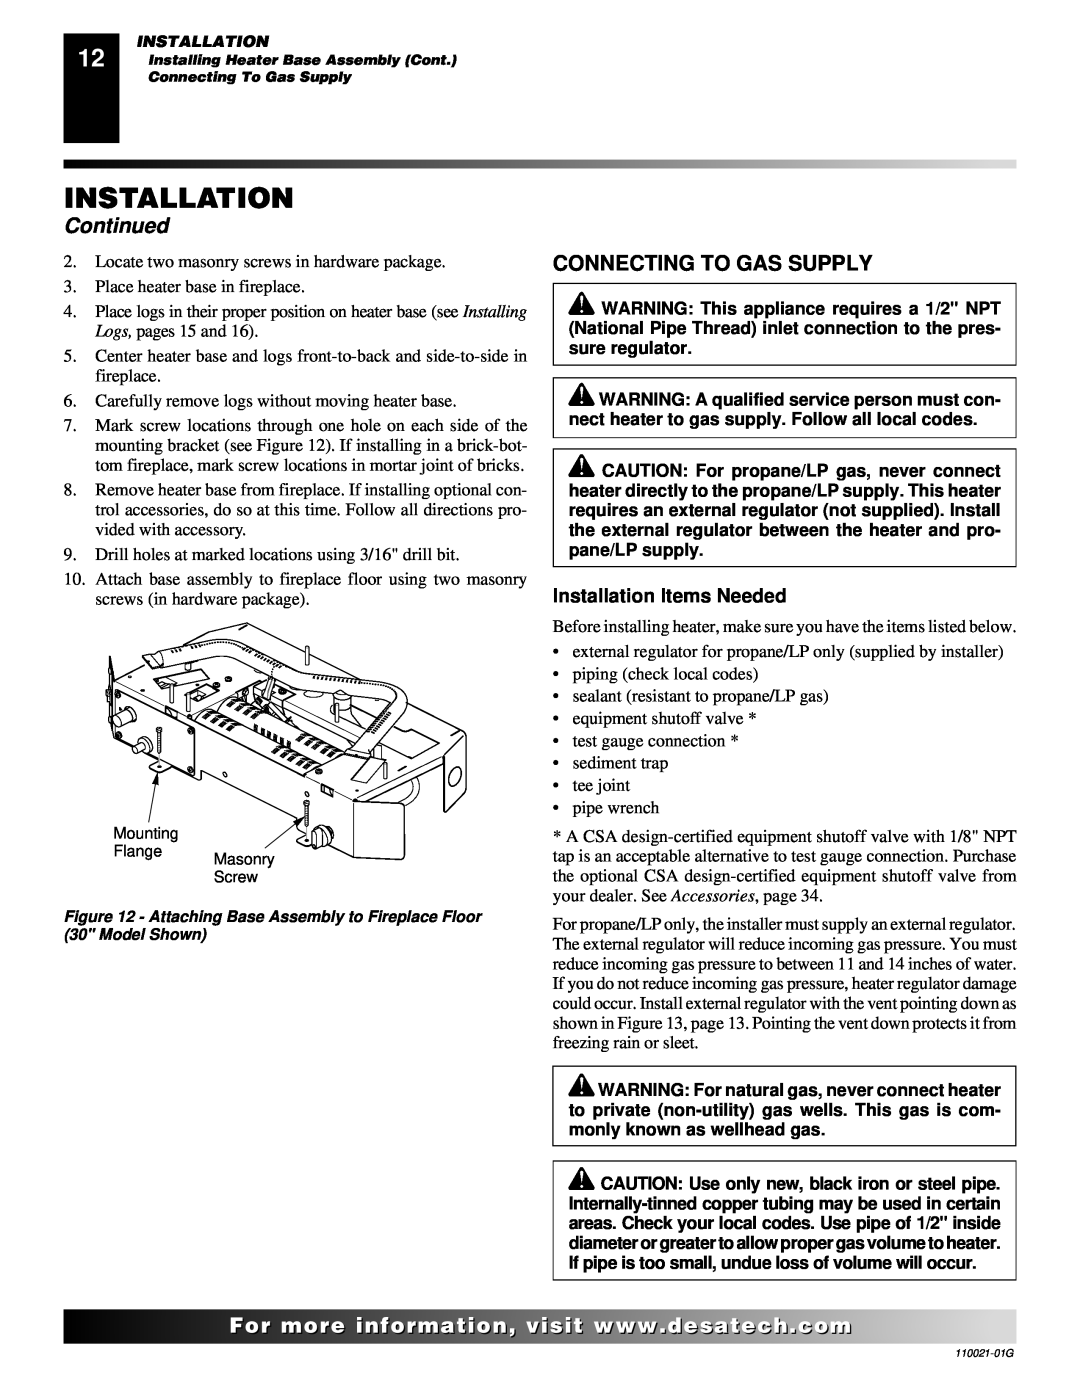 Desa CSG3930PR, CSG3930NR installation manual Connecting To Gas Supply, Continued, Installation Items Needed 